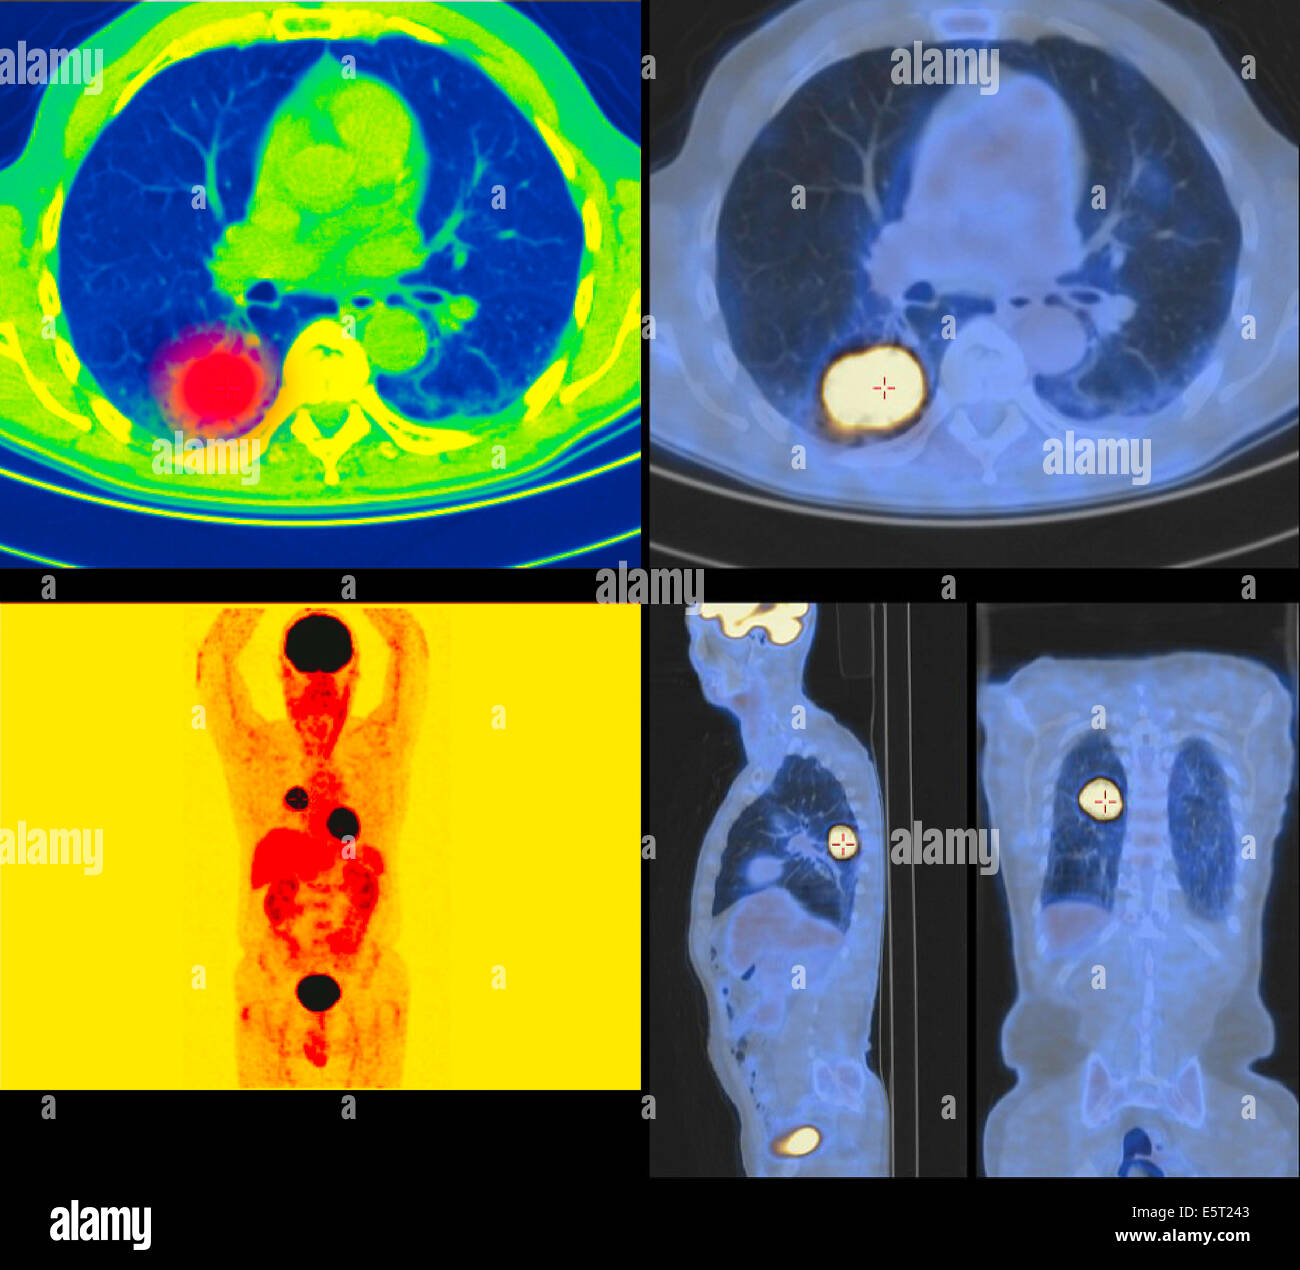 Positron emission tomography (PET) scans of a patient with a tumour the upper lobe of the left lung. Stock Photo